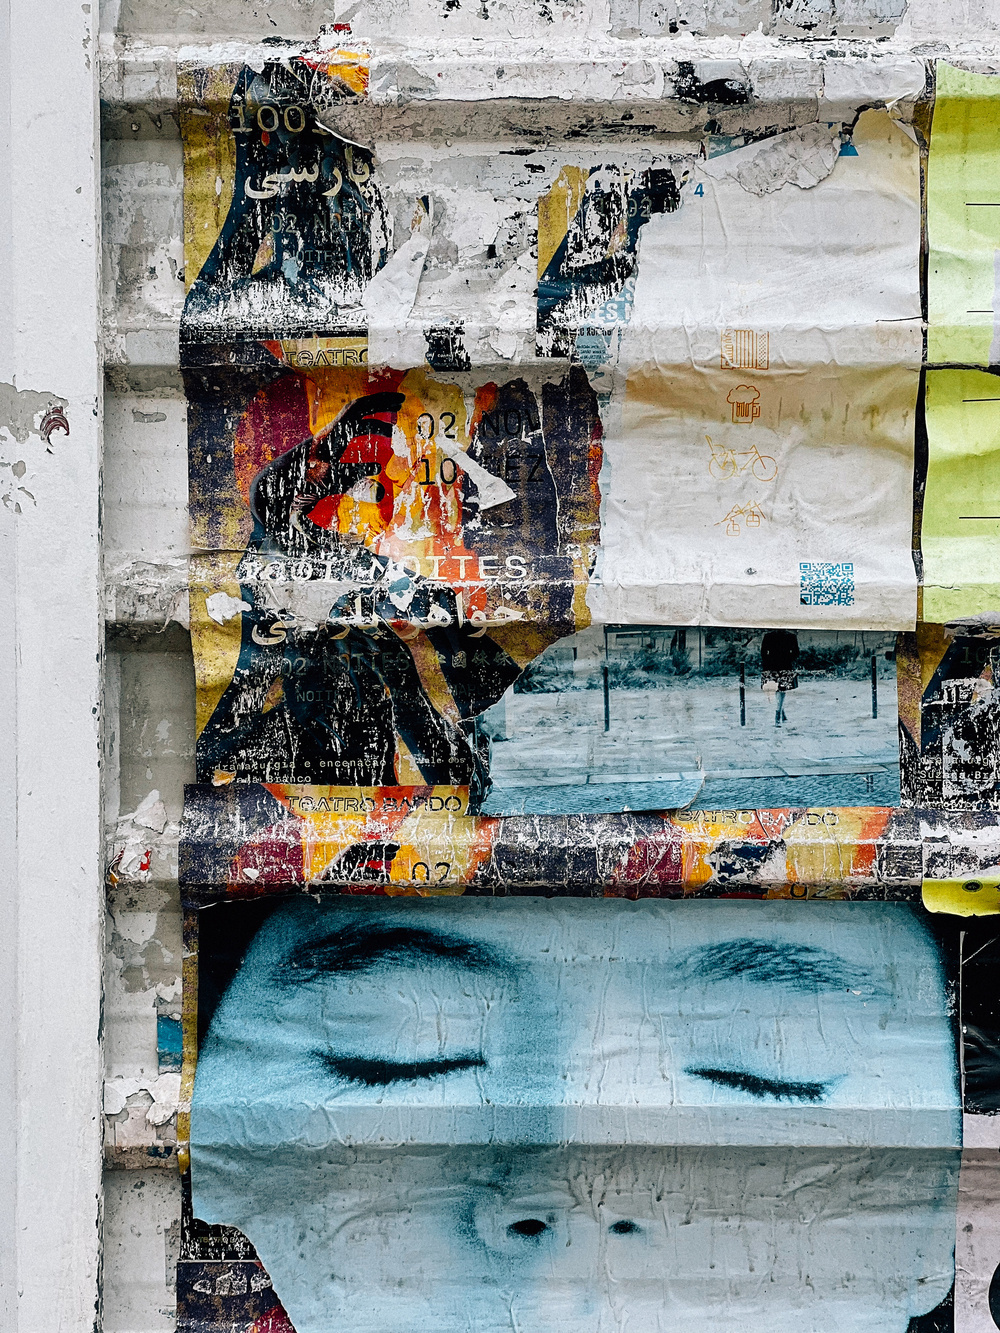 A wall covered in layers of torn and weathered posters and street art. The prominent feature is a large image of a person’s closed eyes in blue hues at the bottom. Other elements include partially ripped posters.